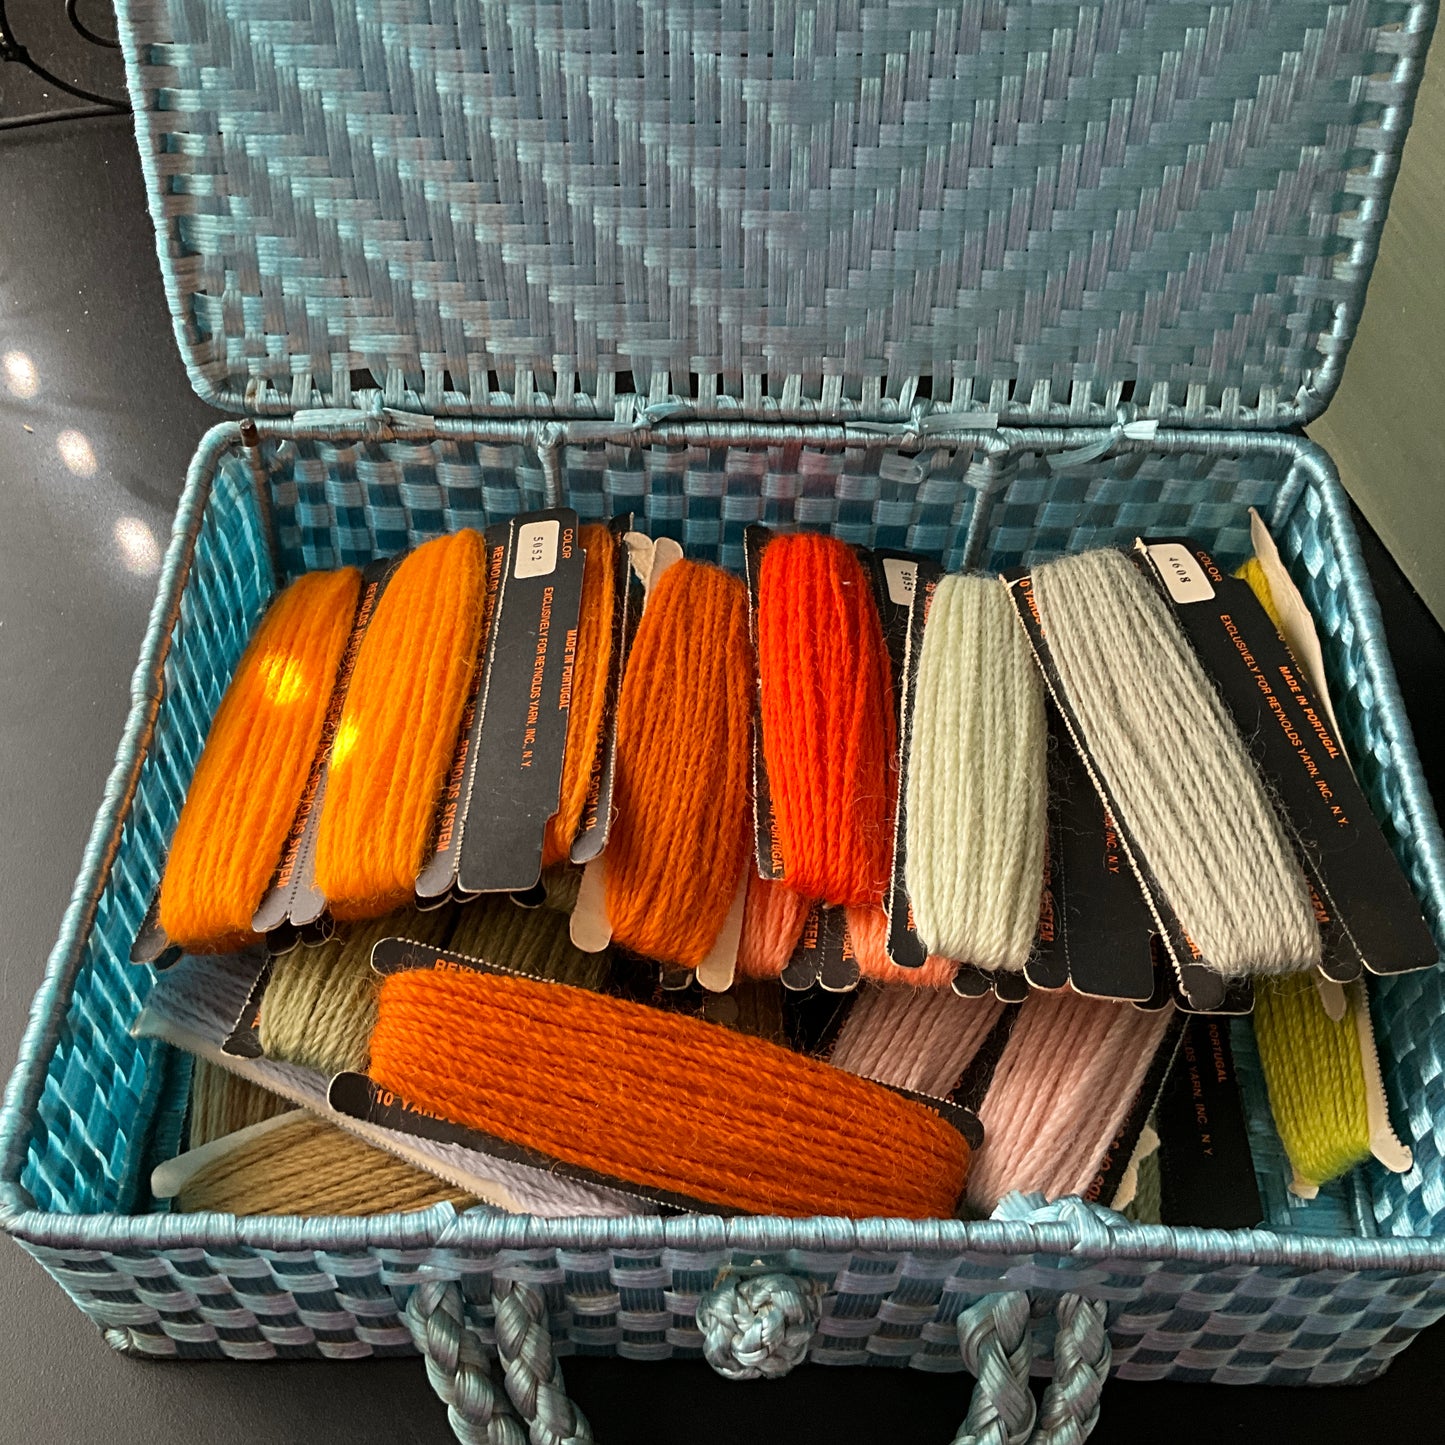 Wonderful woven sewing basket vintage needlecraft storage container with bargain lot of 34 skeins needlepoint crewel yarn see pictures and description*